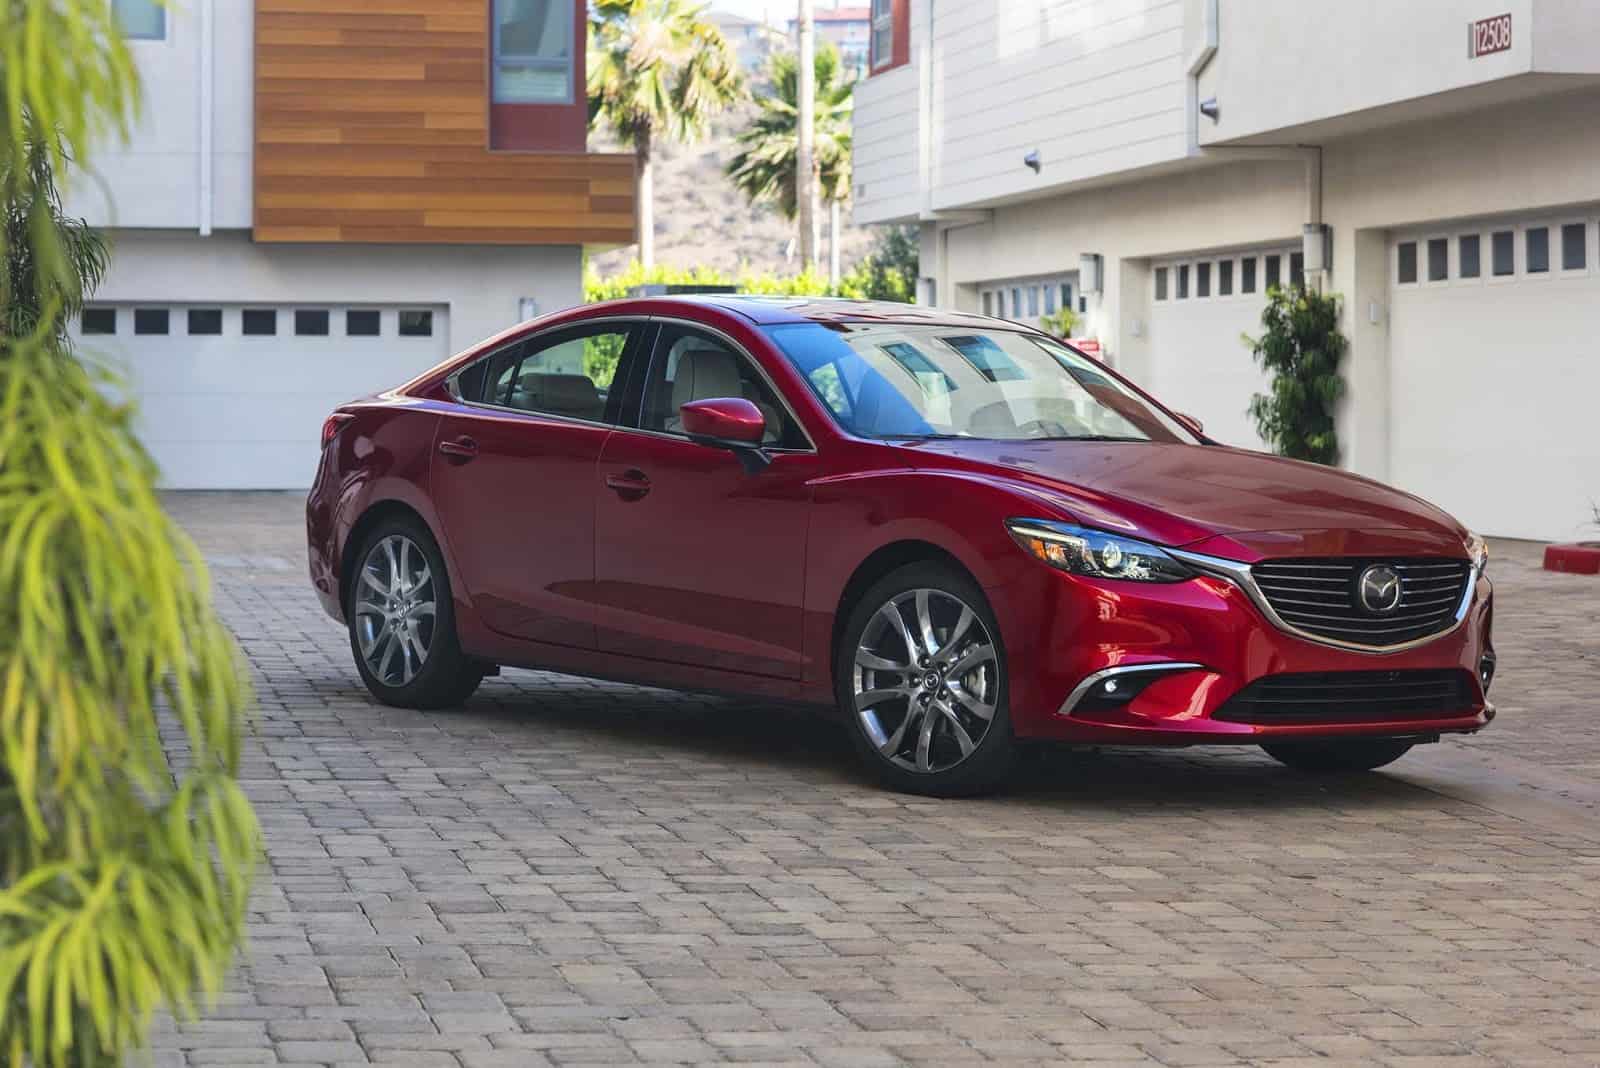 If you just bought a 2017 Mazda 6, these are the mods you need to upgrade your ride.